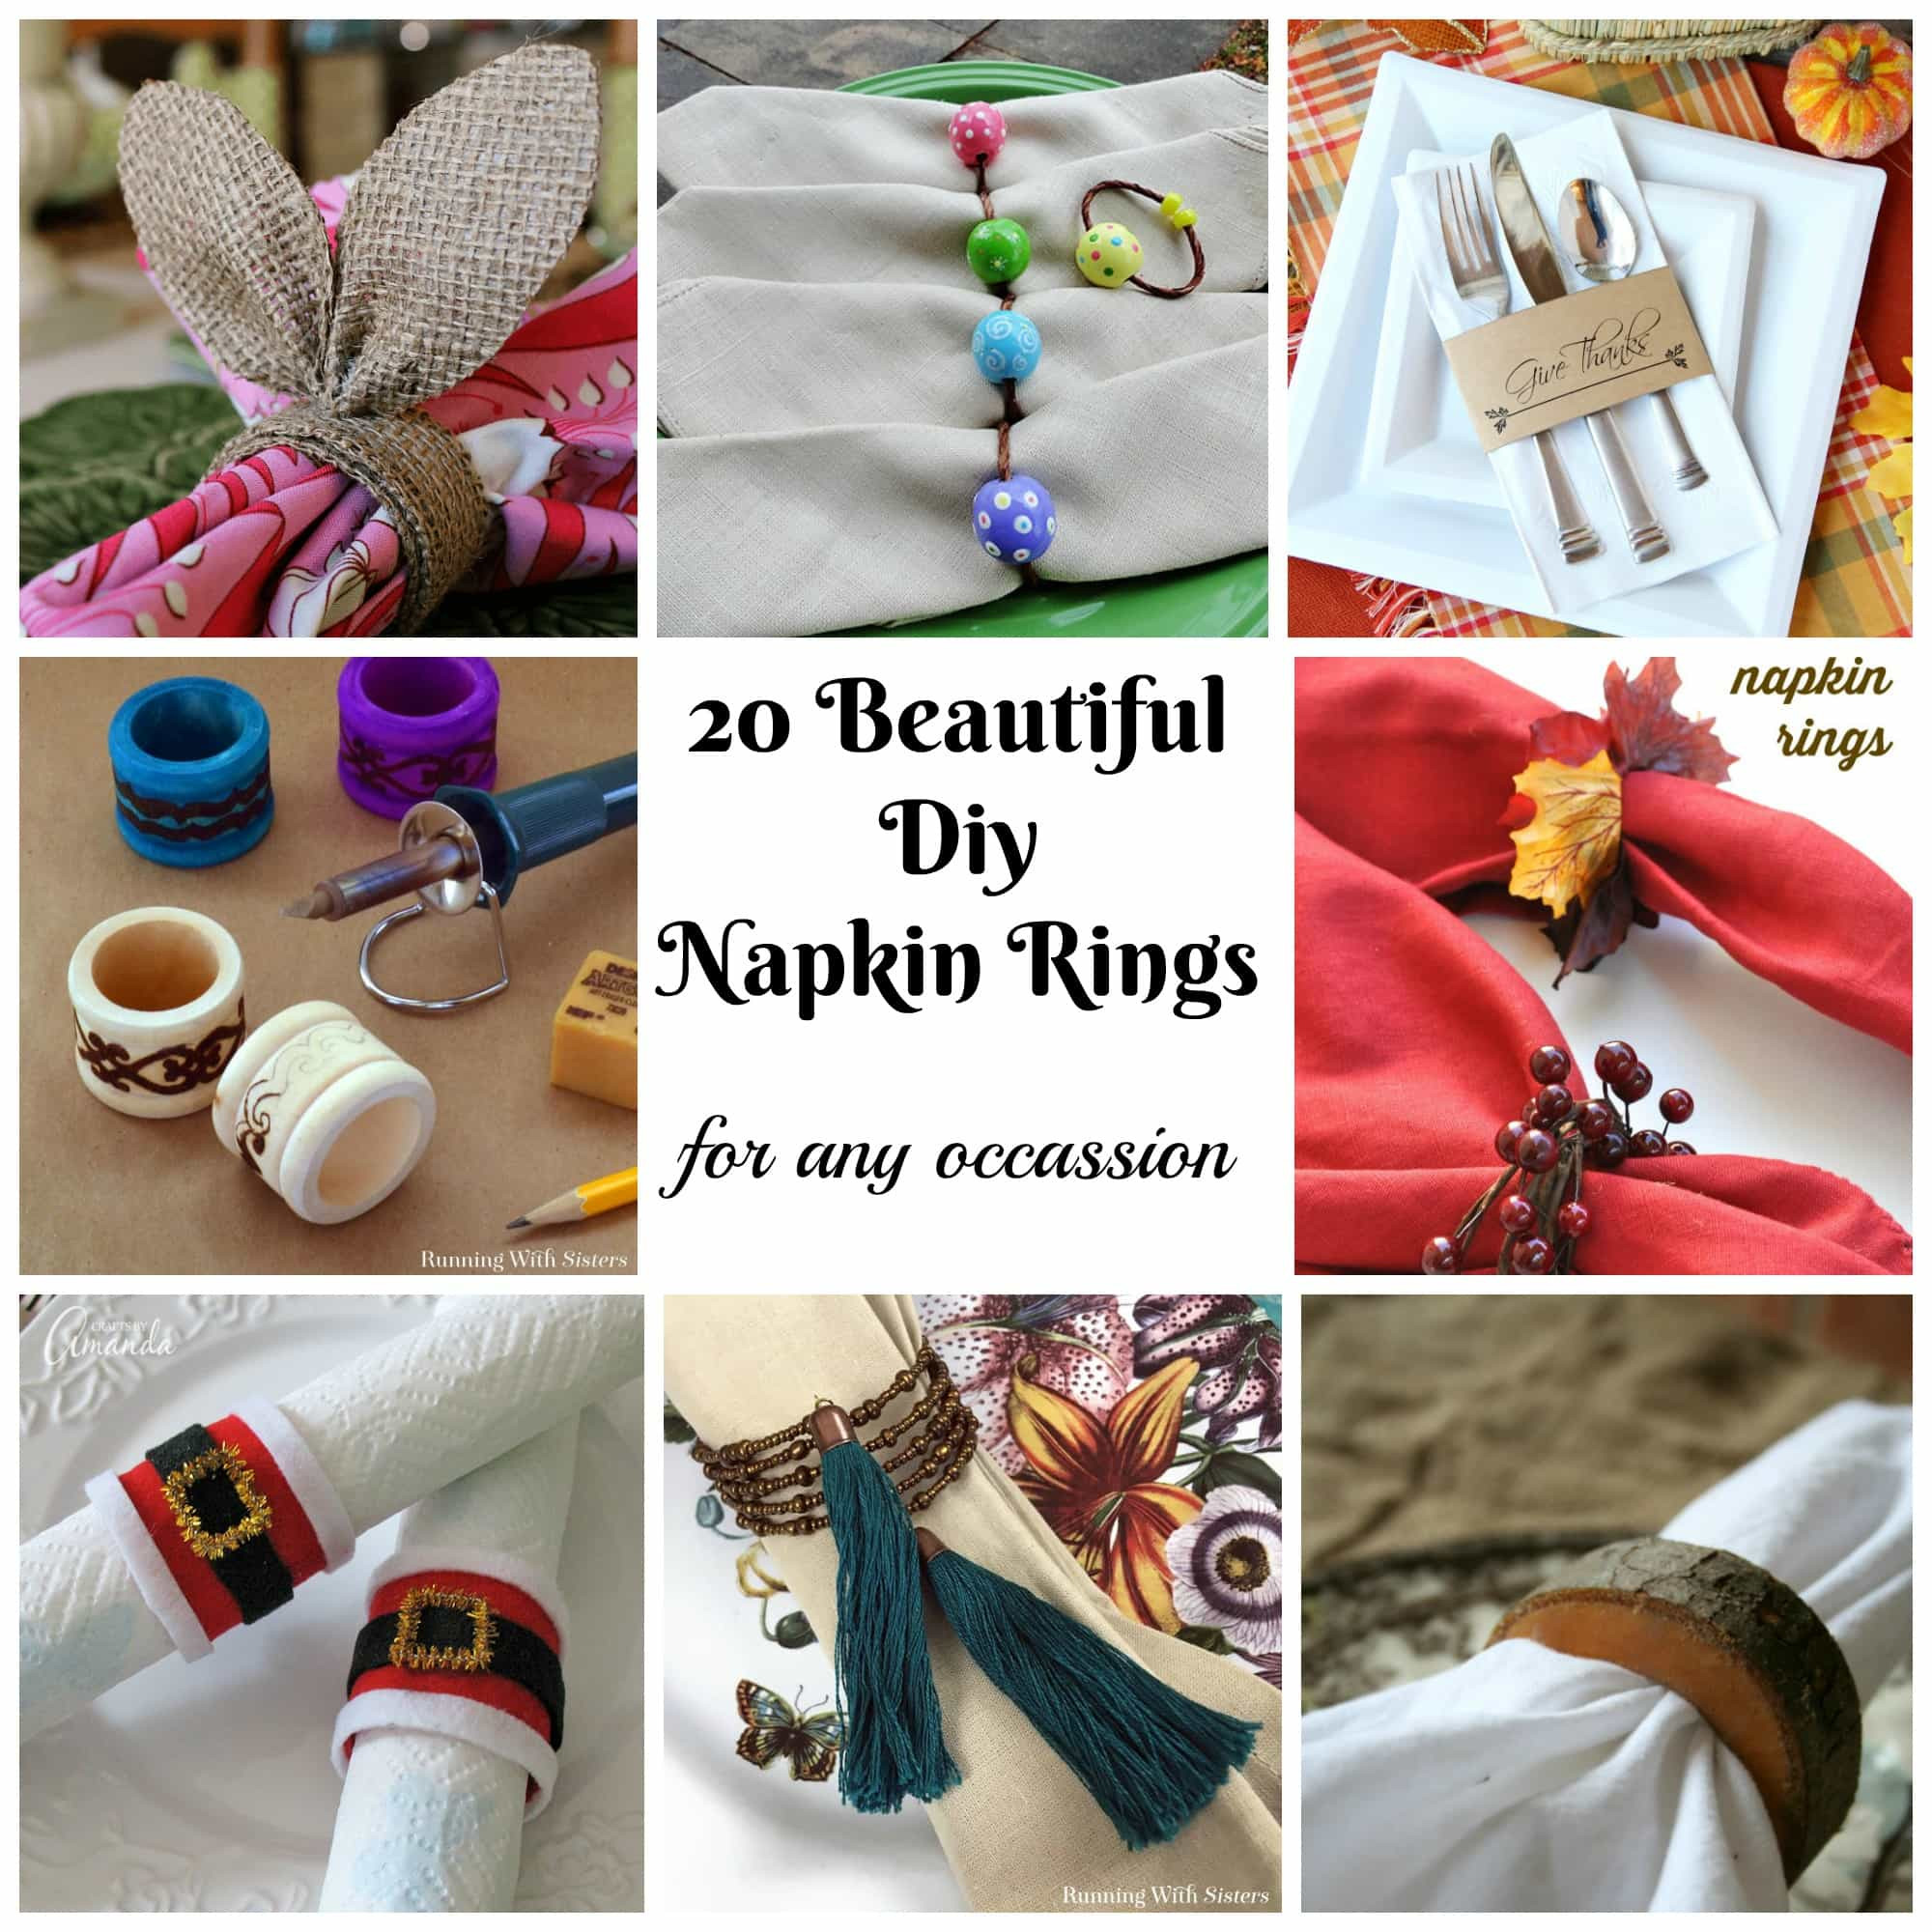 DIY Christmas Napkin Rings
 20 Beautiful DIY Napkin Rings for any Occassion My Turn